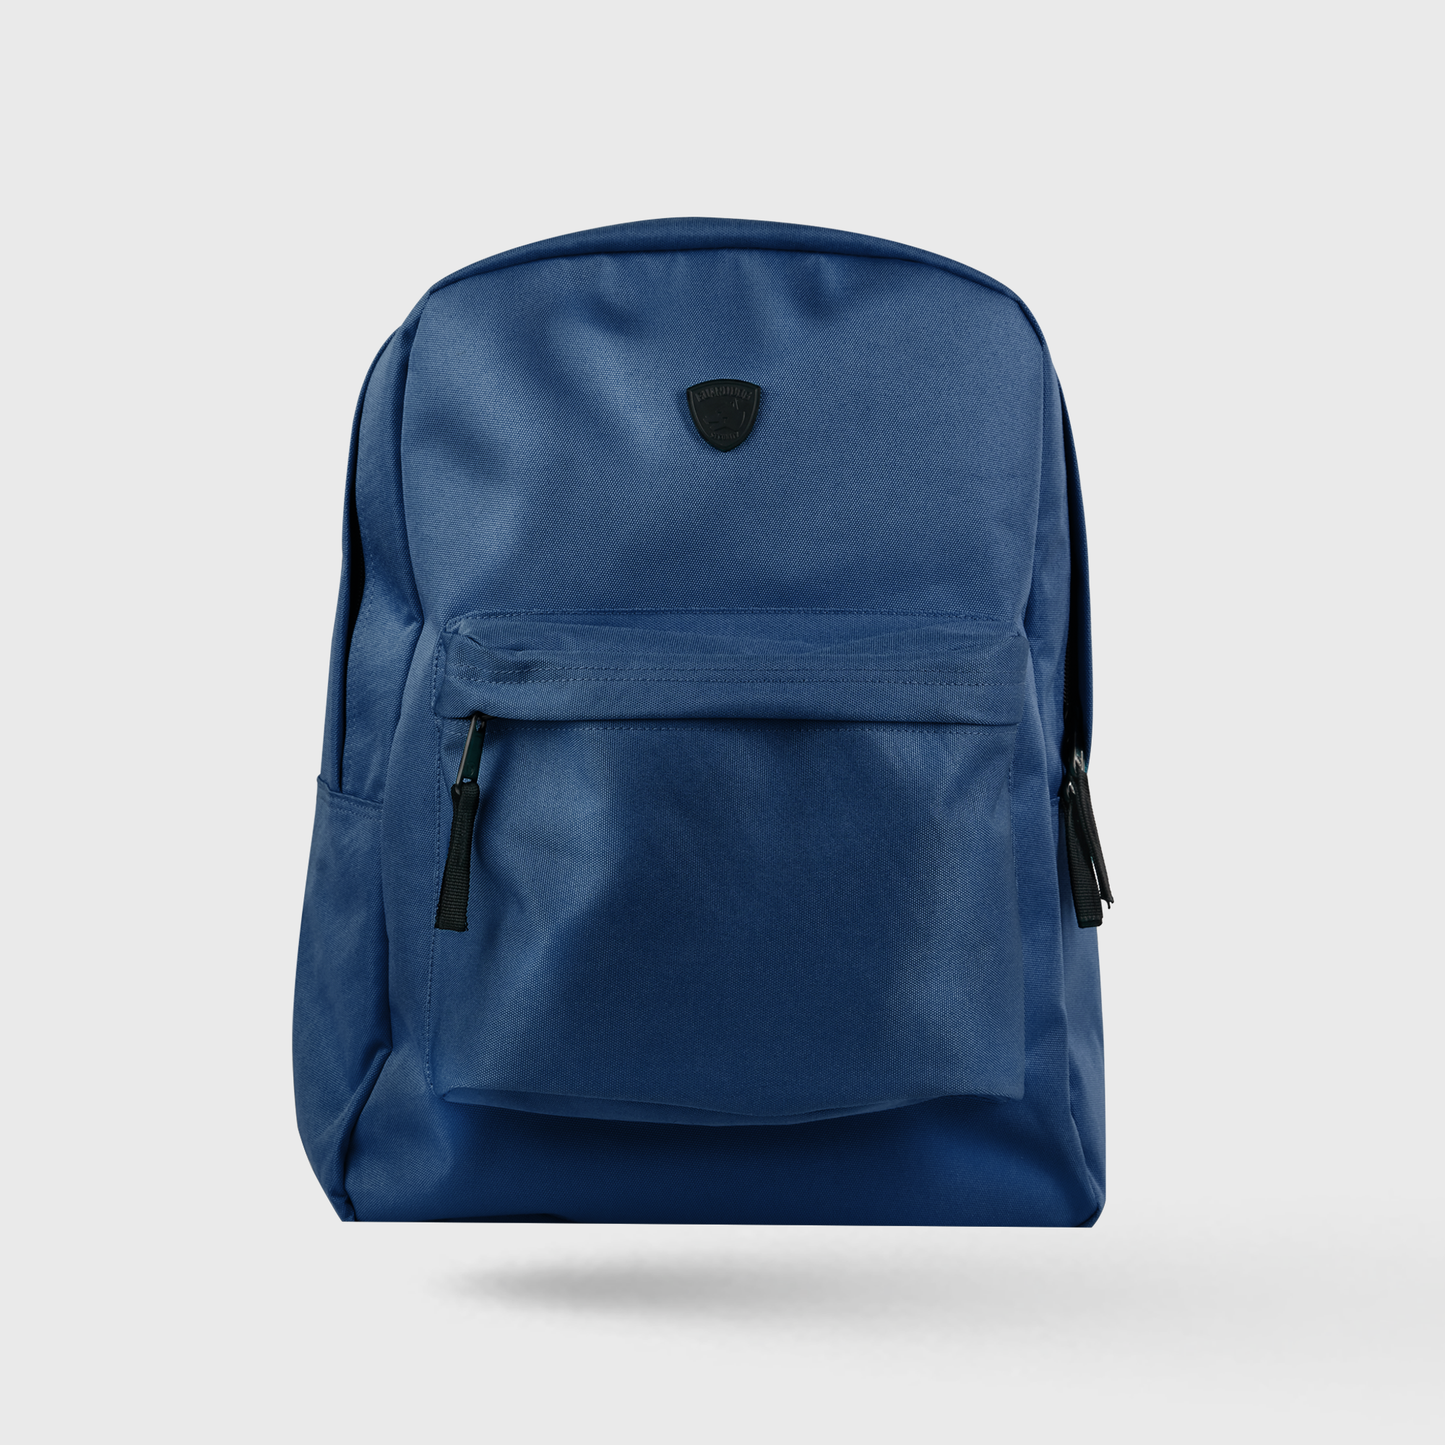 Bulletproof Backpack Proshield Scout Navy Blue | Youth Edition